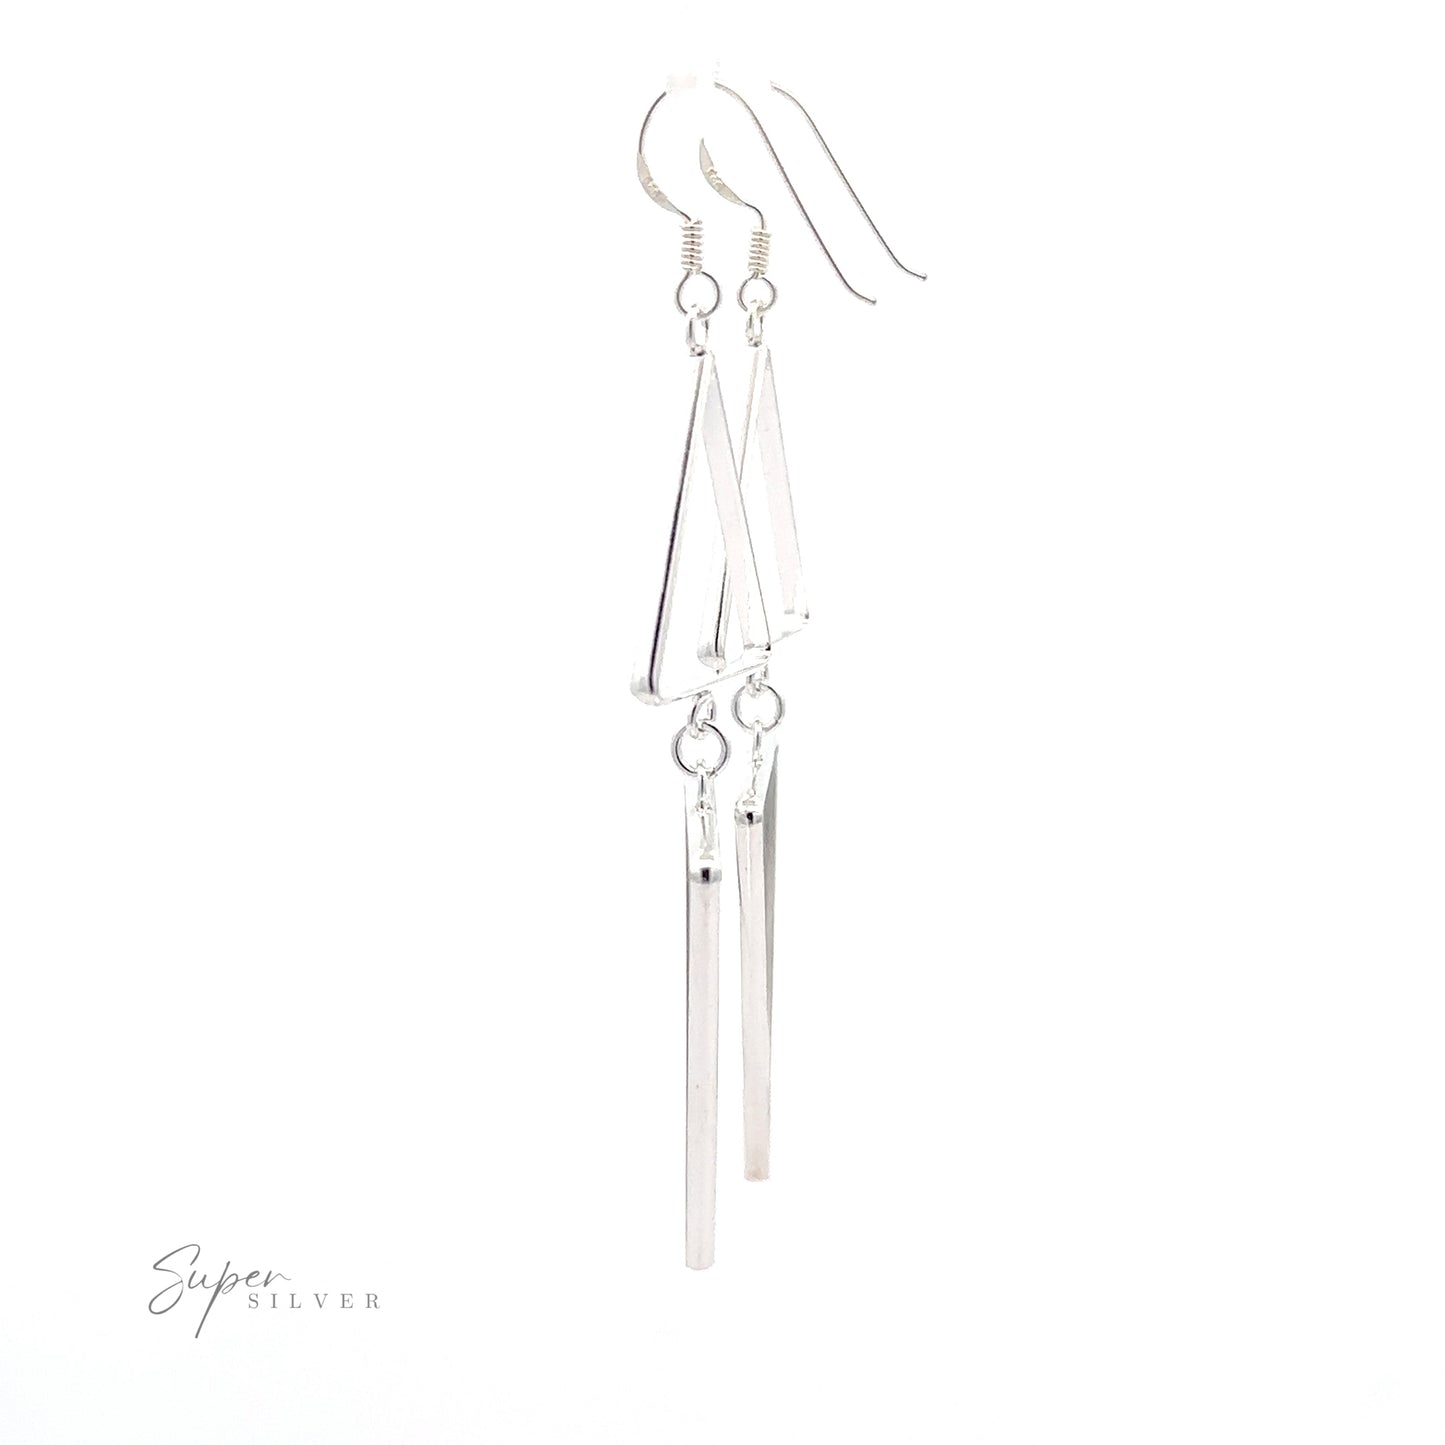 
                  
                    Two Long Modern Double Triangle Earrings dangling against a white background.
                  
                